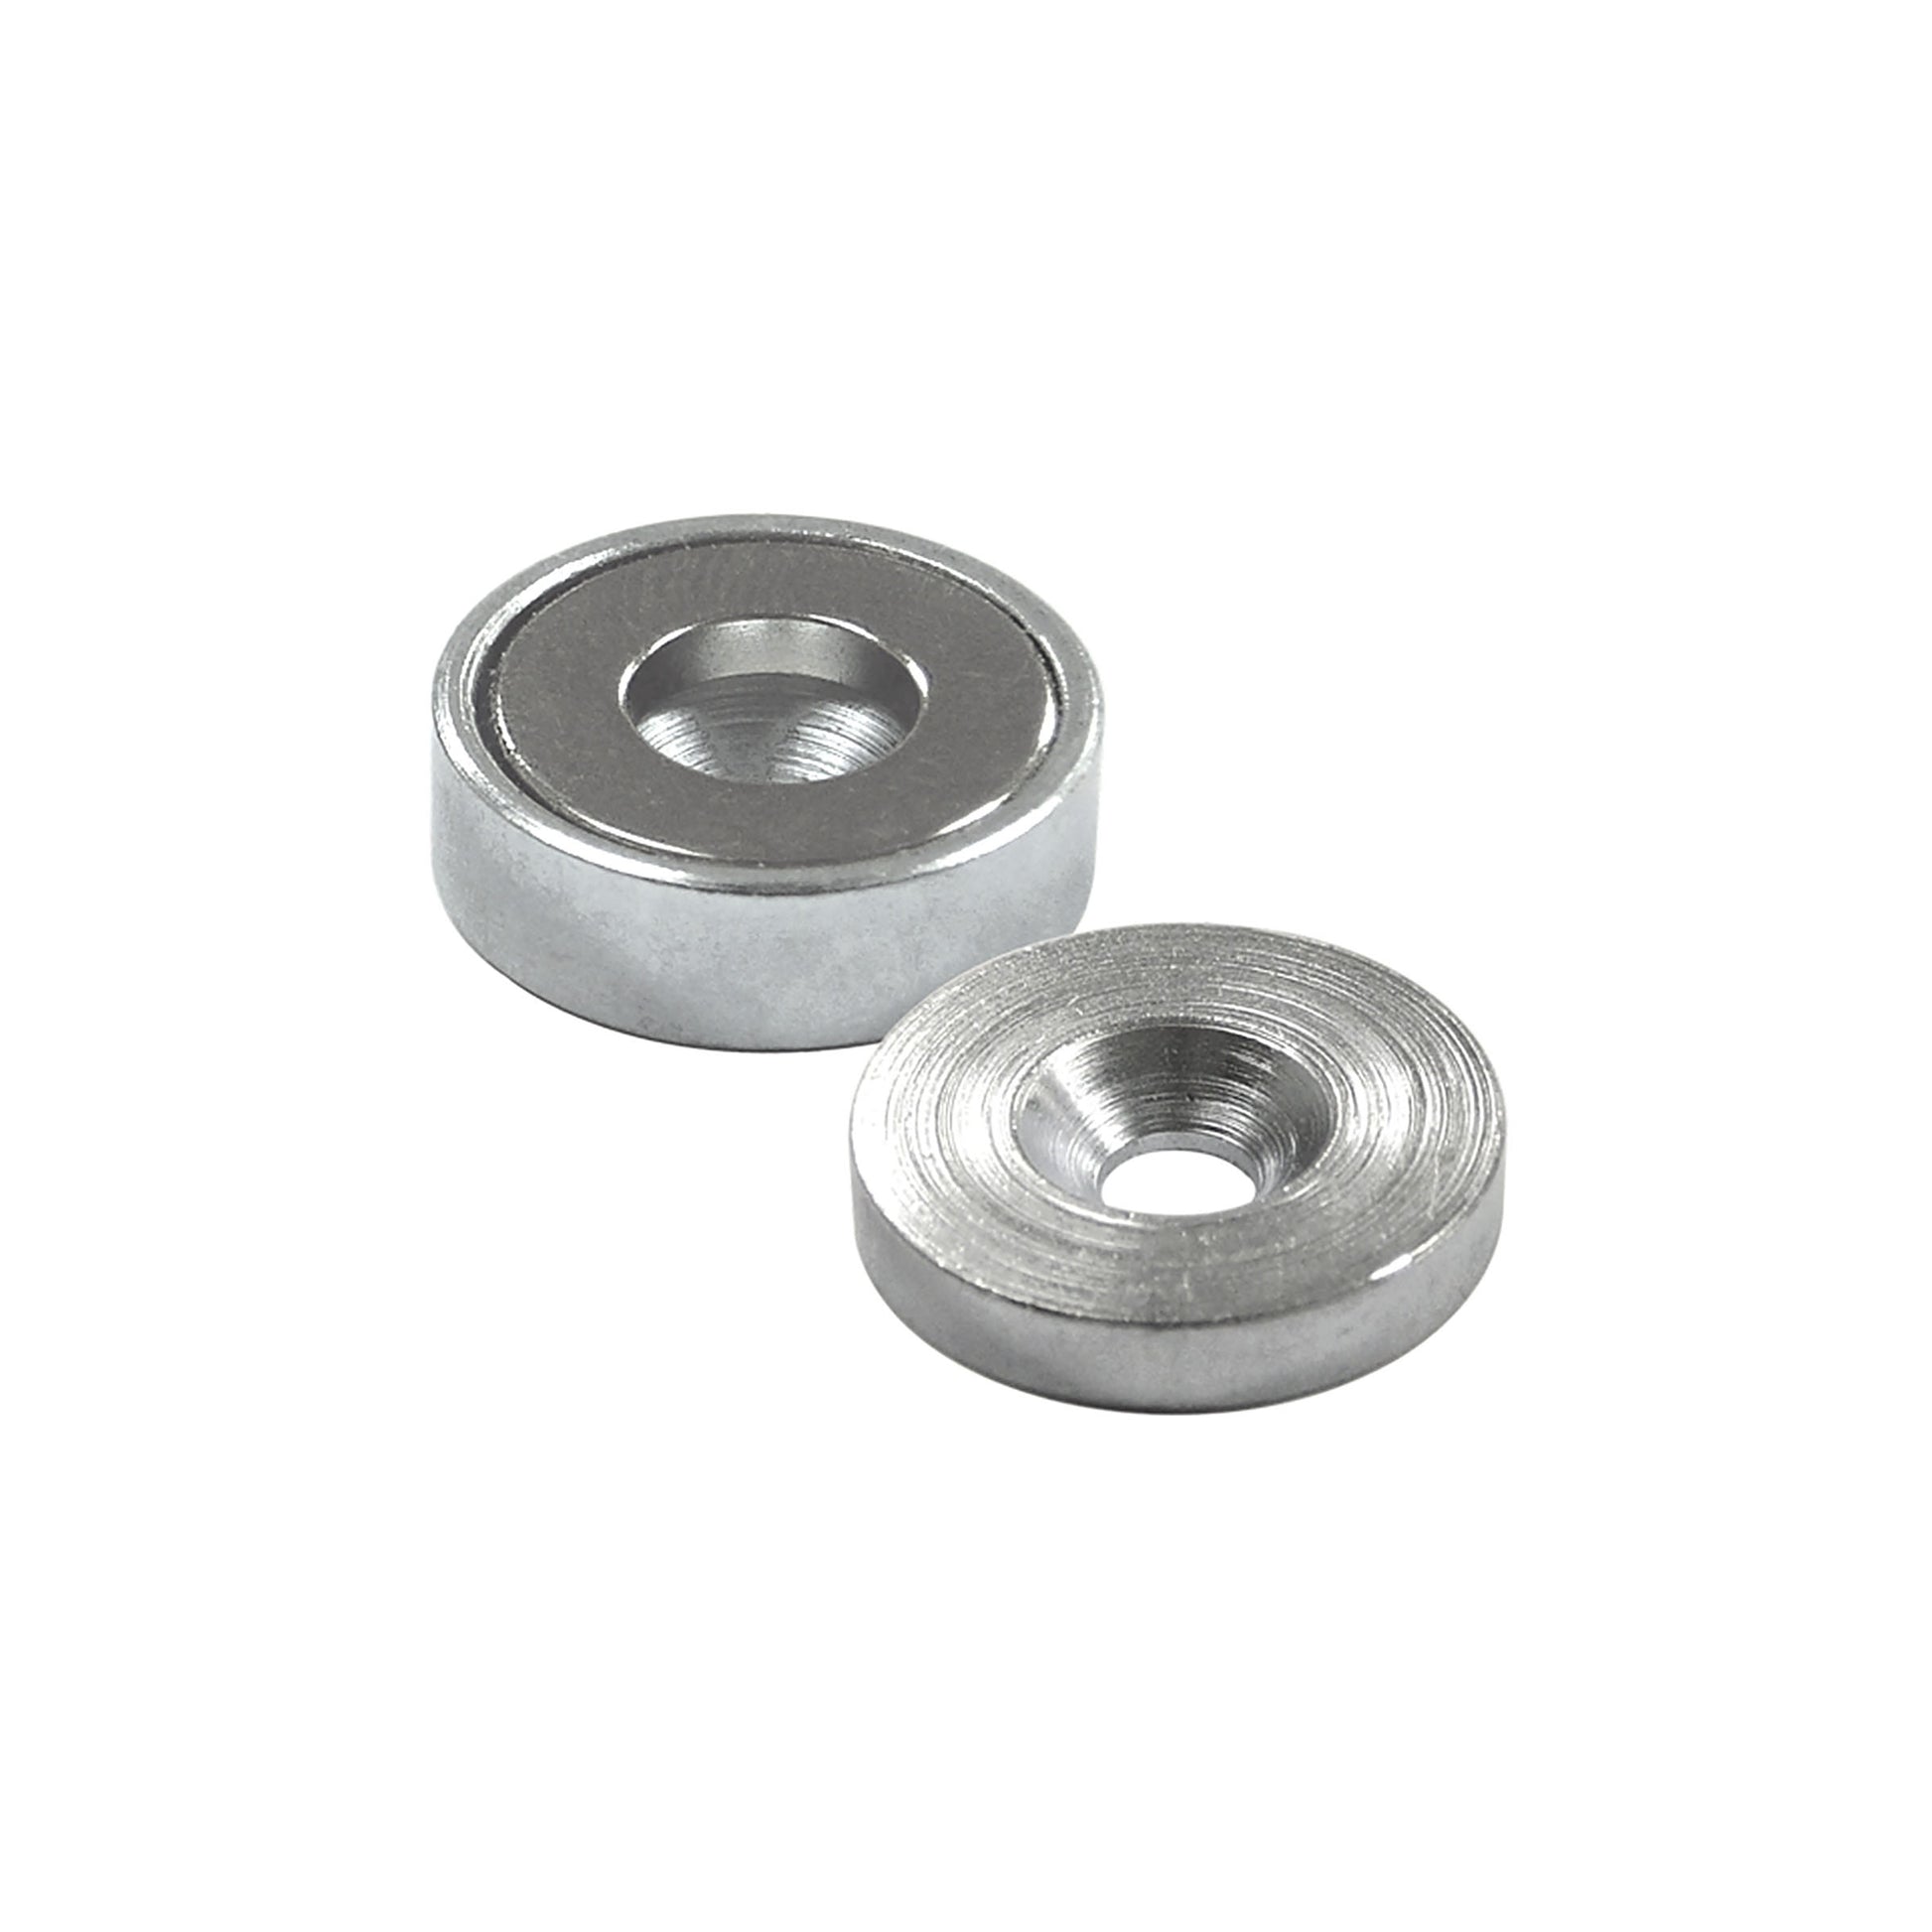 Load image into Gallery viewer, 07573 Neodymium Latch Magnet Kit (1 set) - 45 Degree Angle View